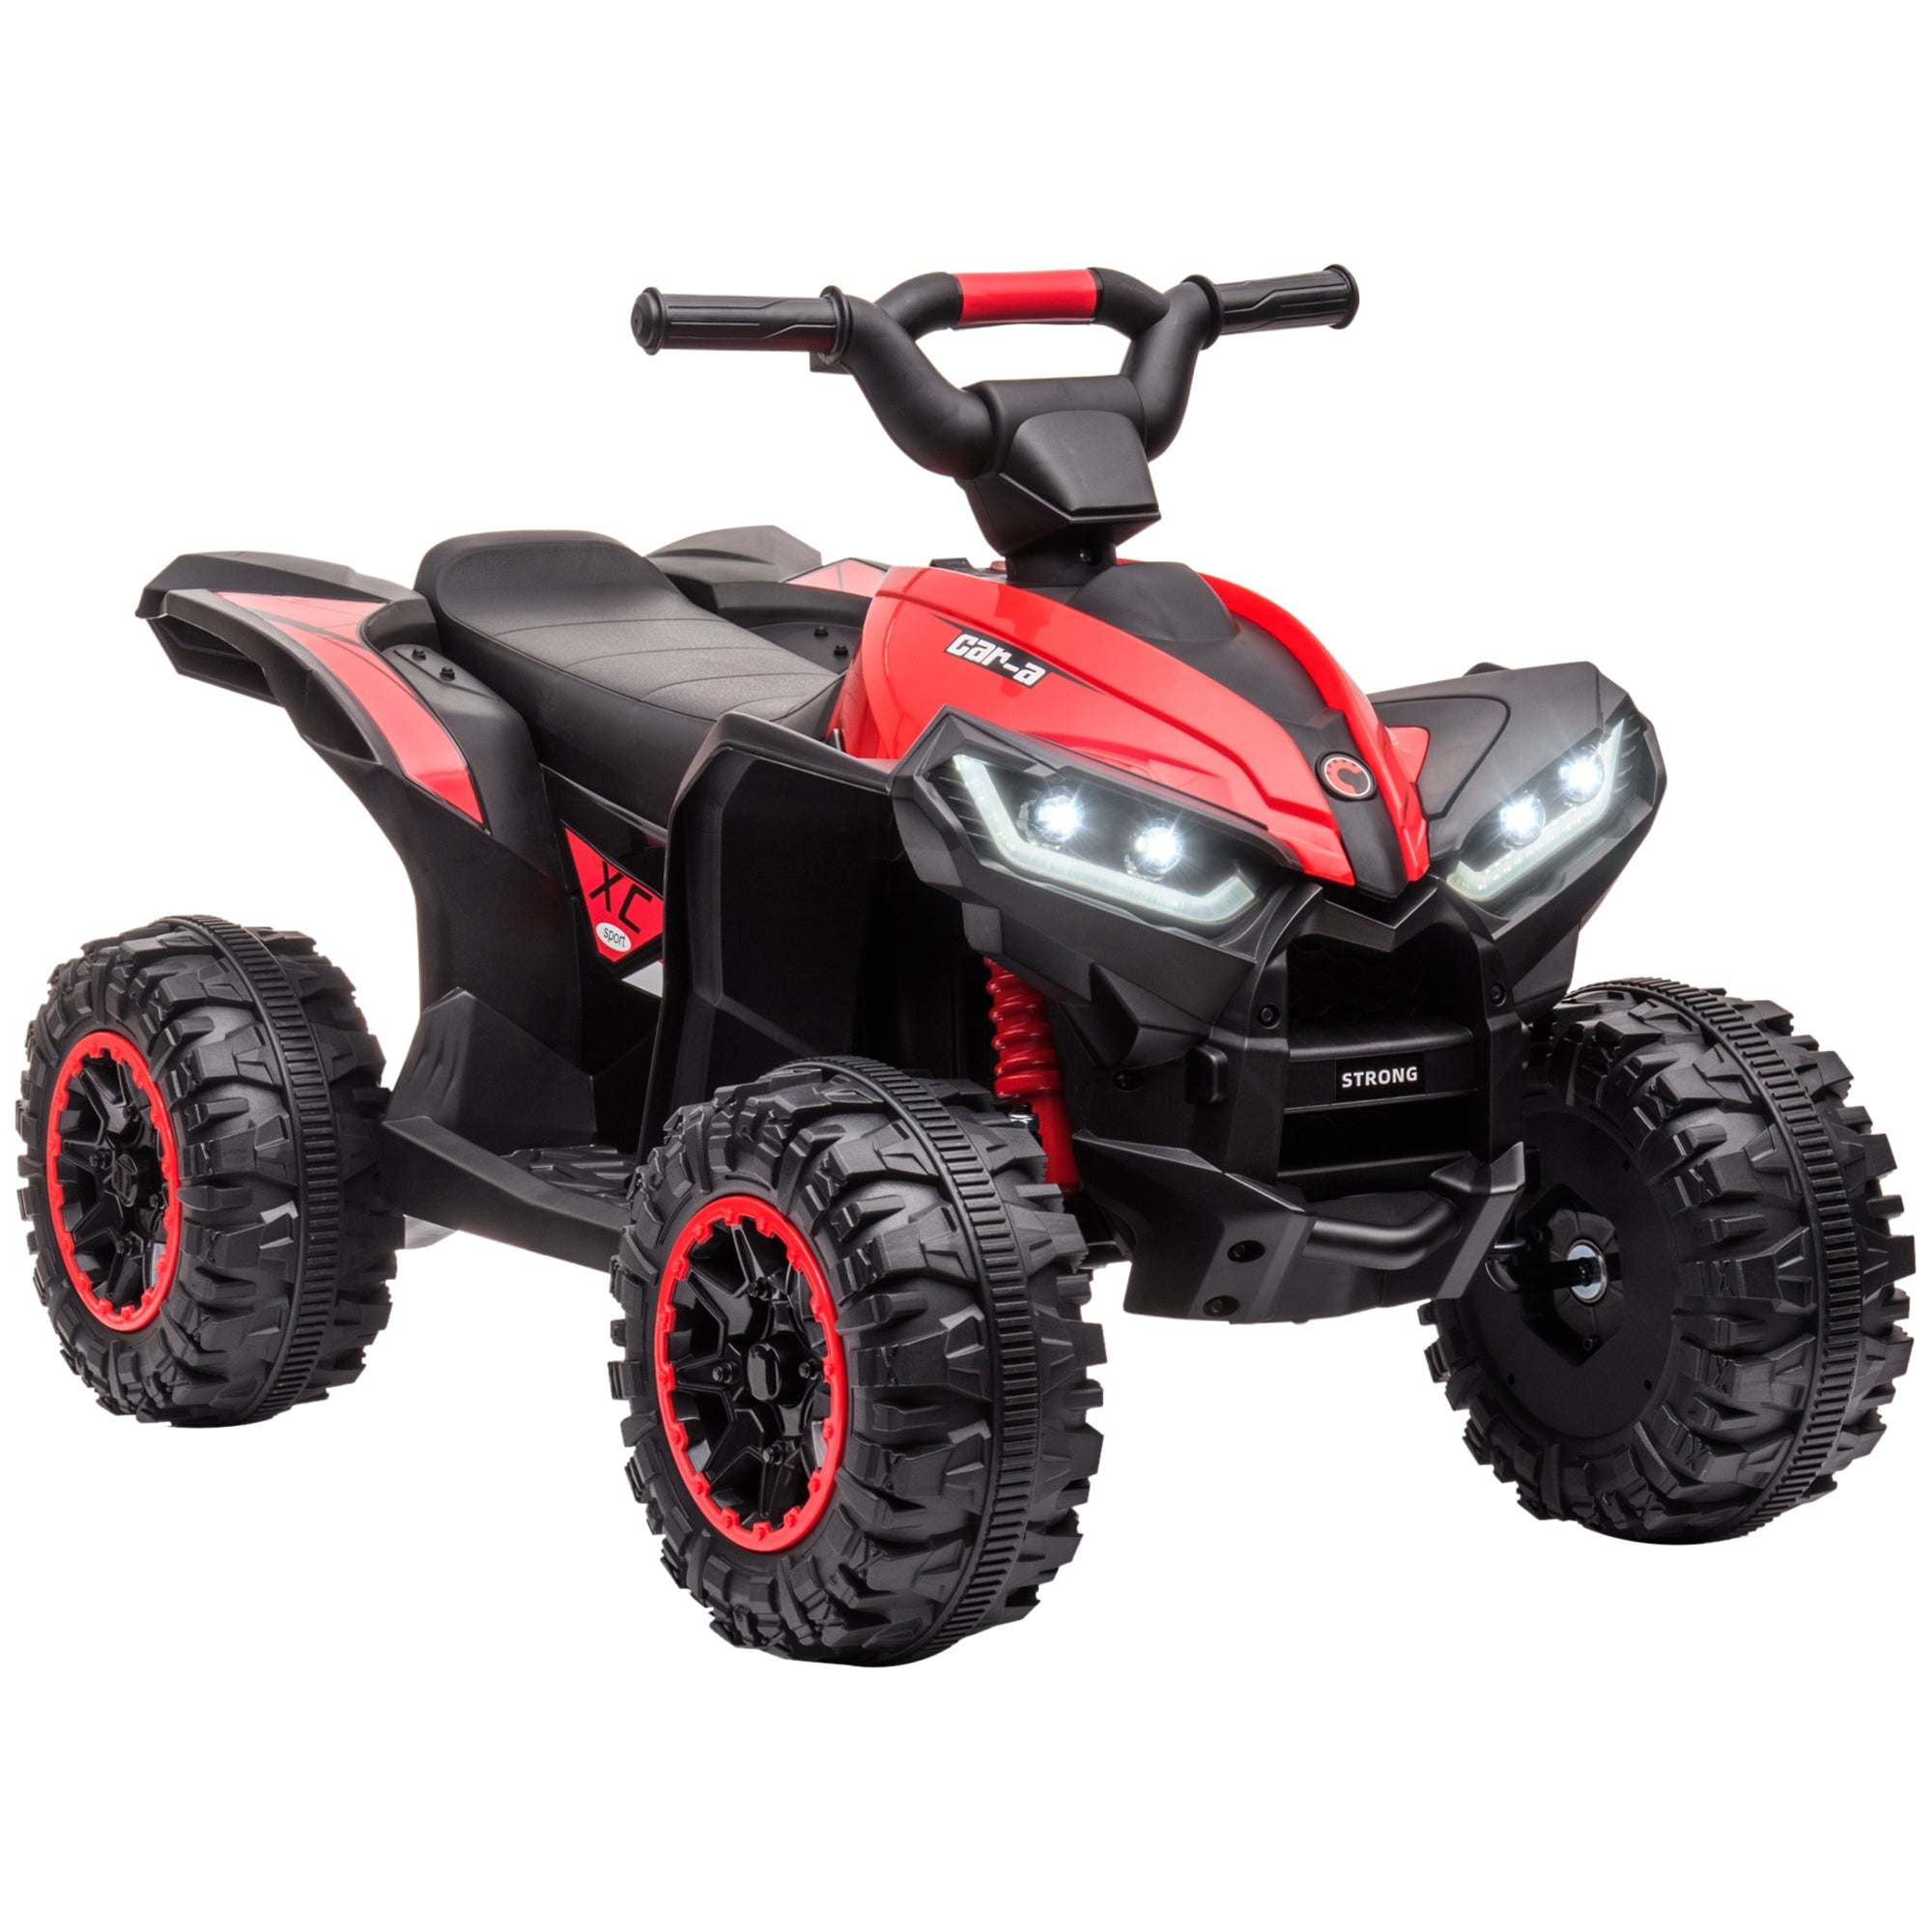 12V Children Ride on car, 4 Wheelers Quad Car with Dual Motors, LED Headlights, Suspension System, Music for 3-5 Years Old, Red